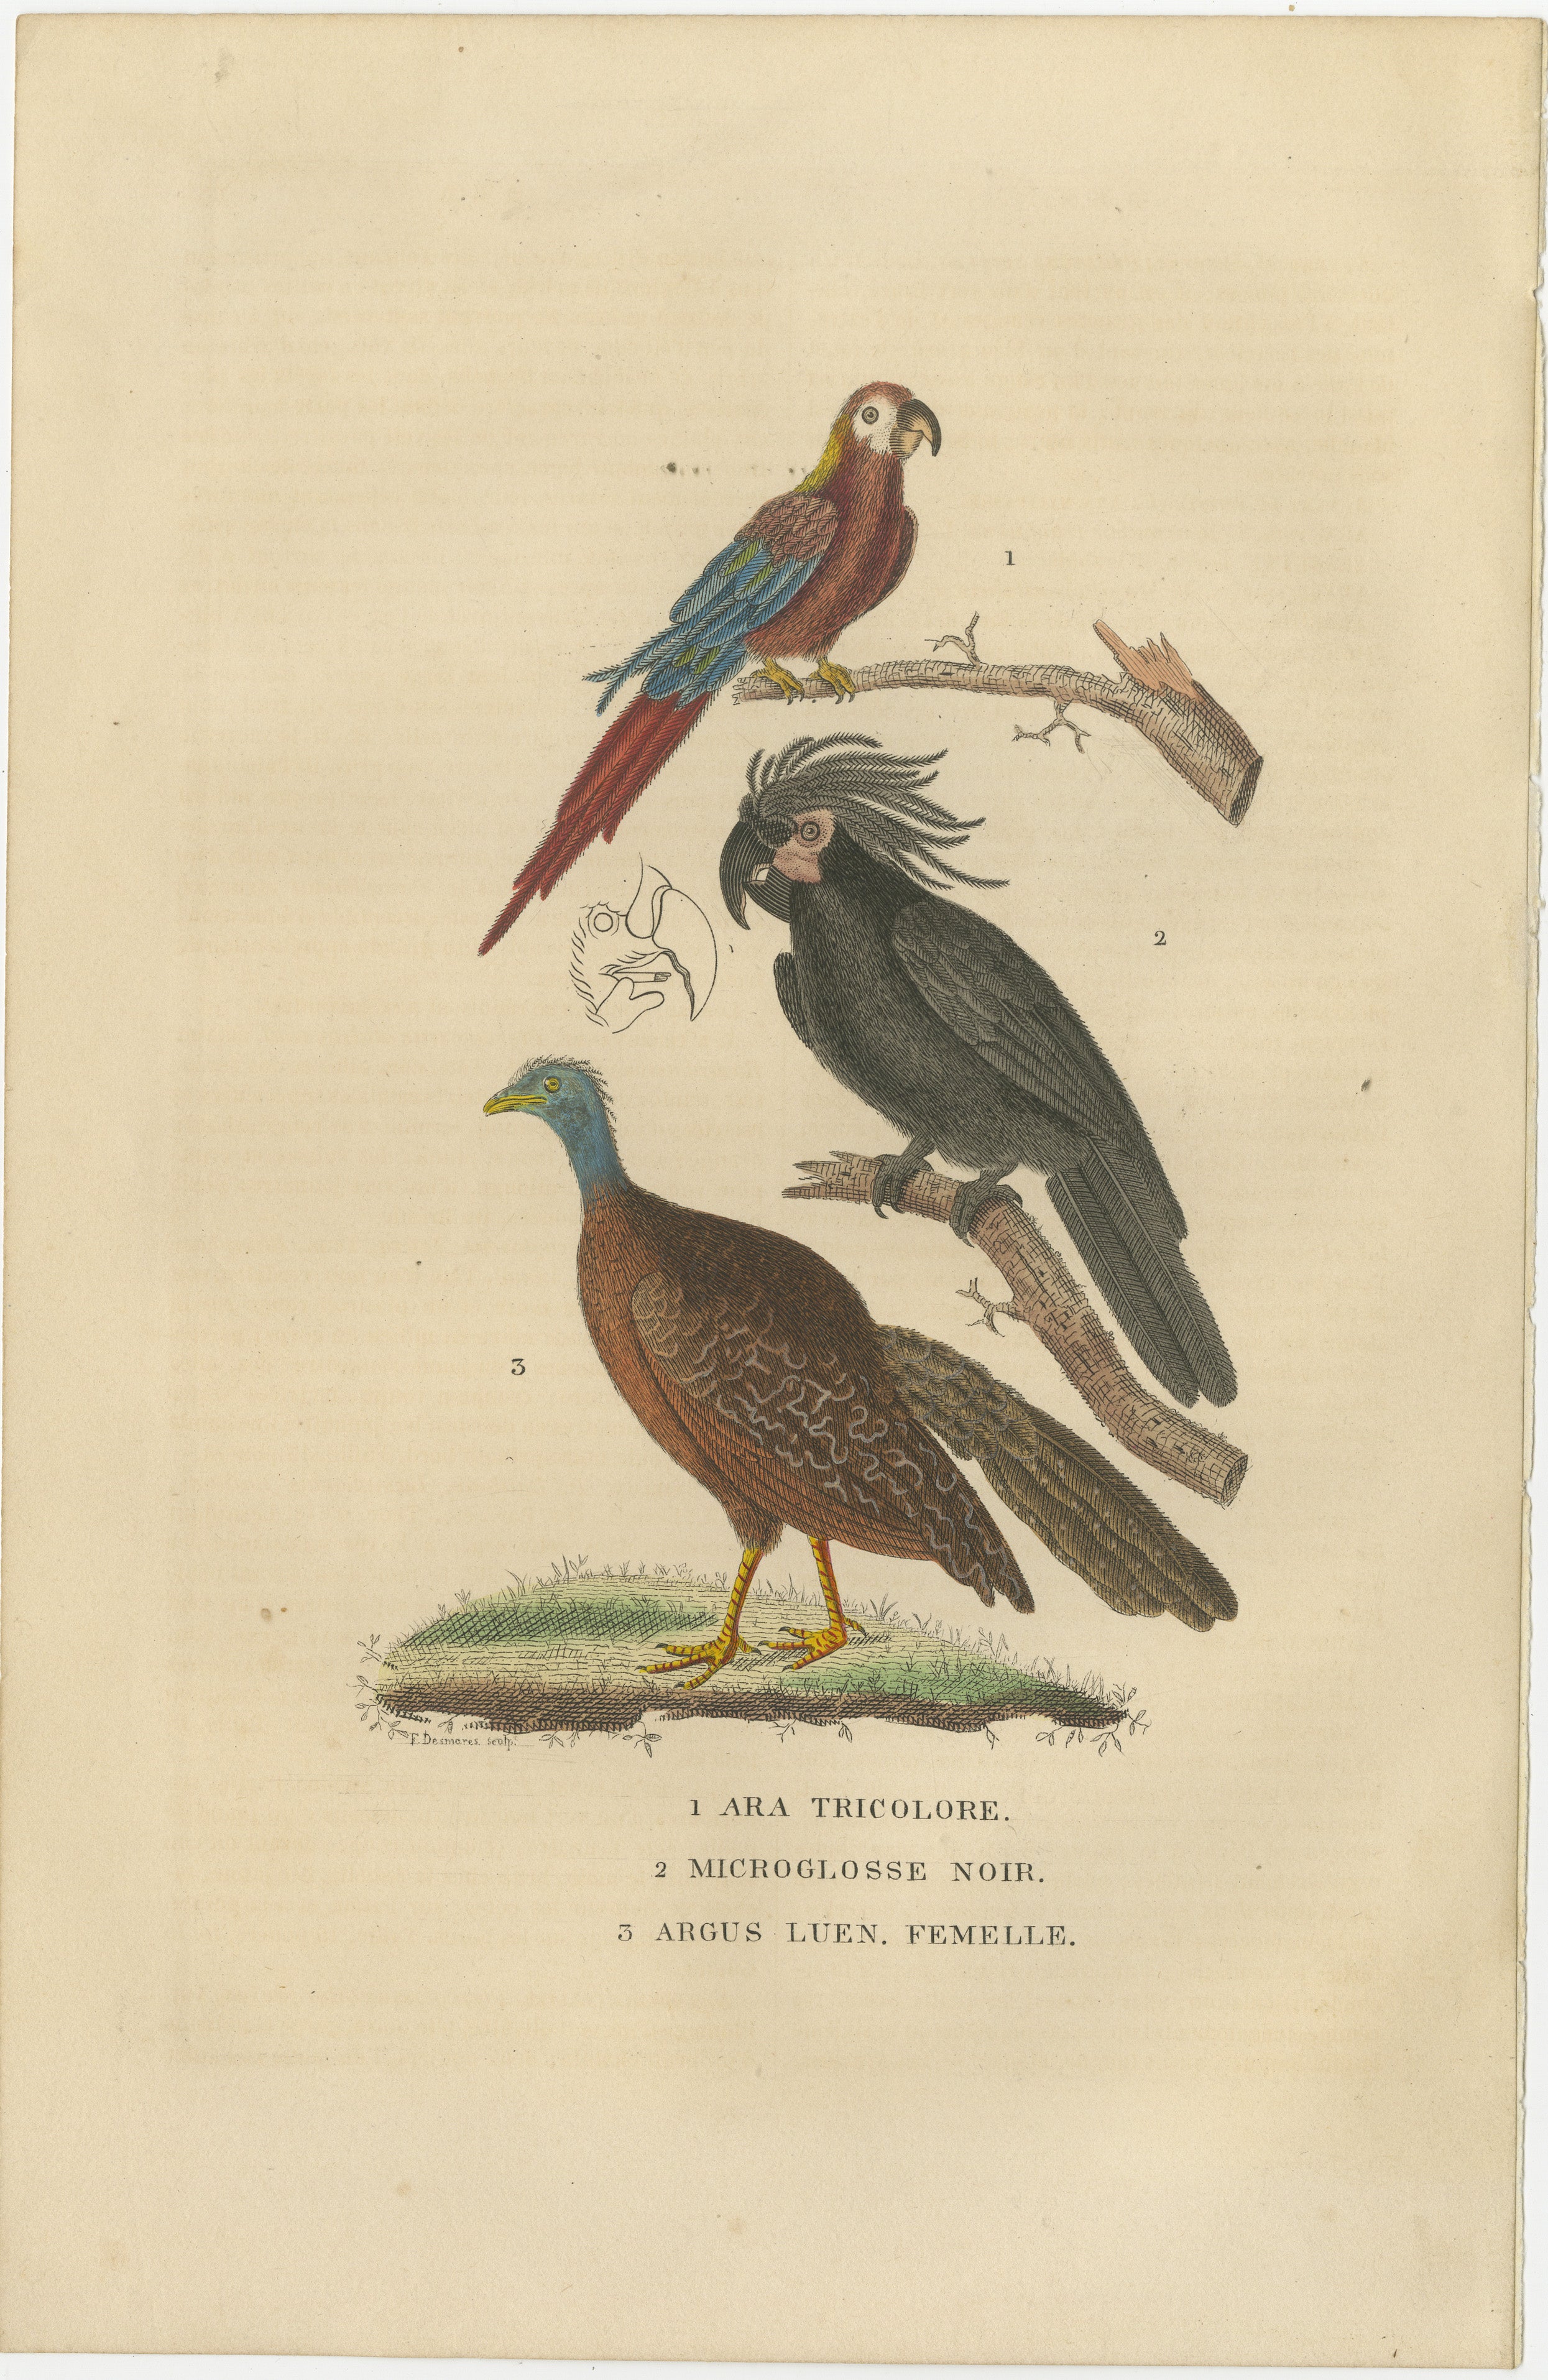 The antique print features three captivating bird species: the Ara Tricolore, the Black Sunbird, and the female Argus Pheasant. Each bird is intricately depicted with detailed precision and vibrant hand-colored illustrations, creating a visually